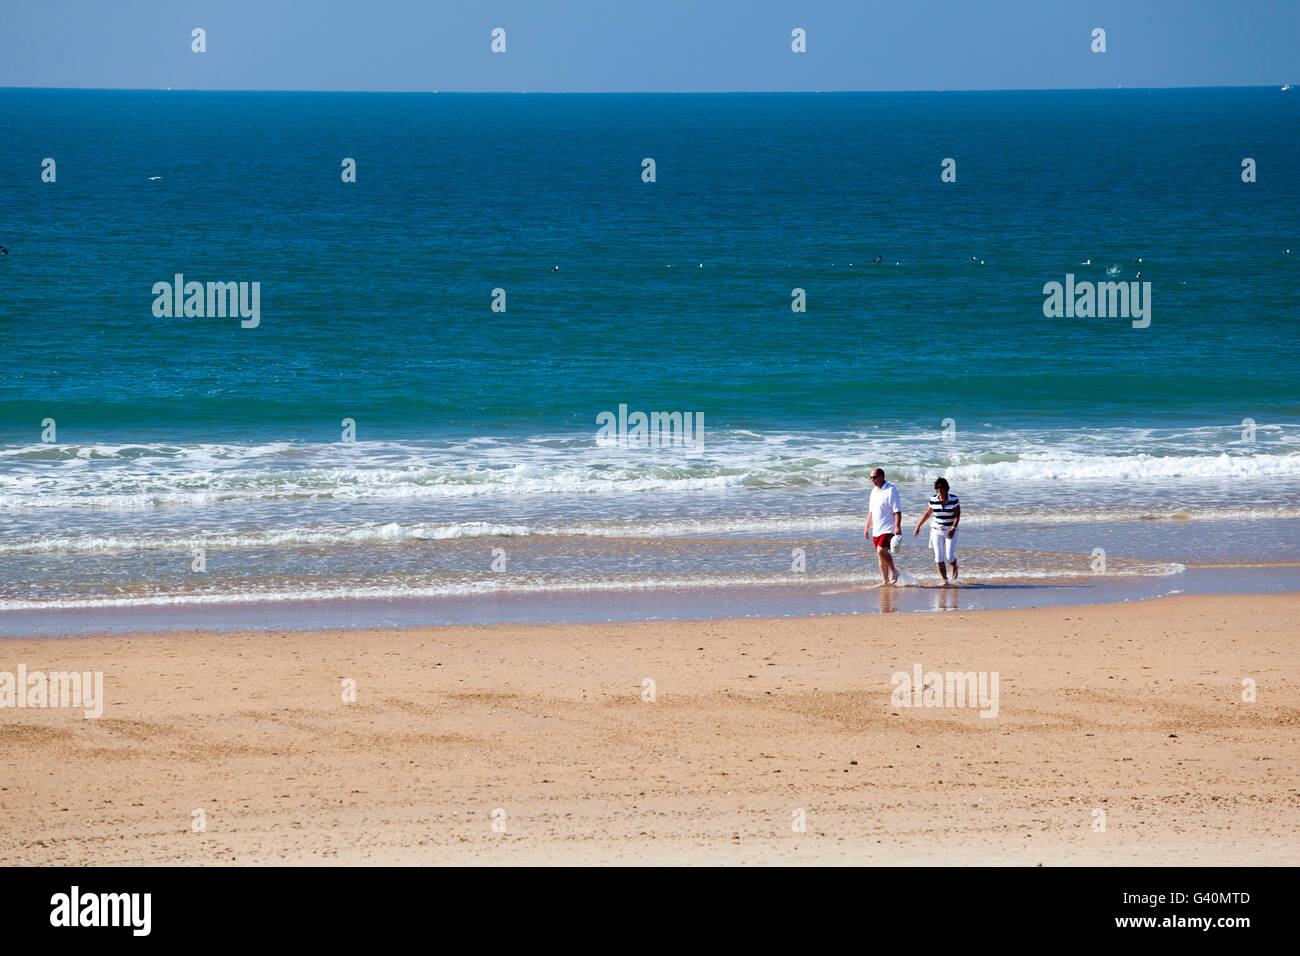 Rota Beaches High Resolution Stock Photography and Images - Alamy